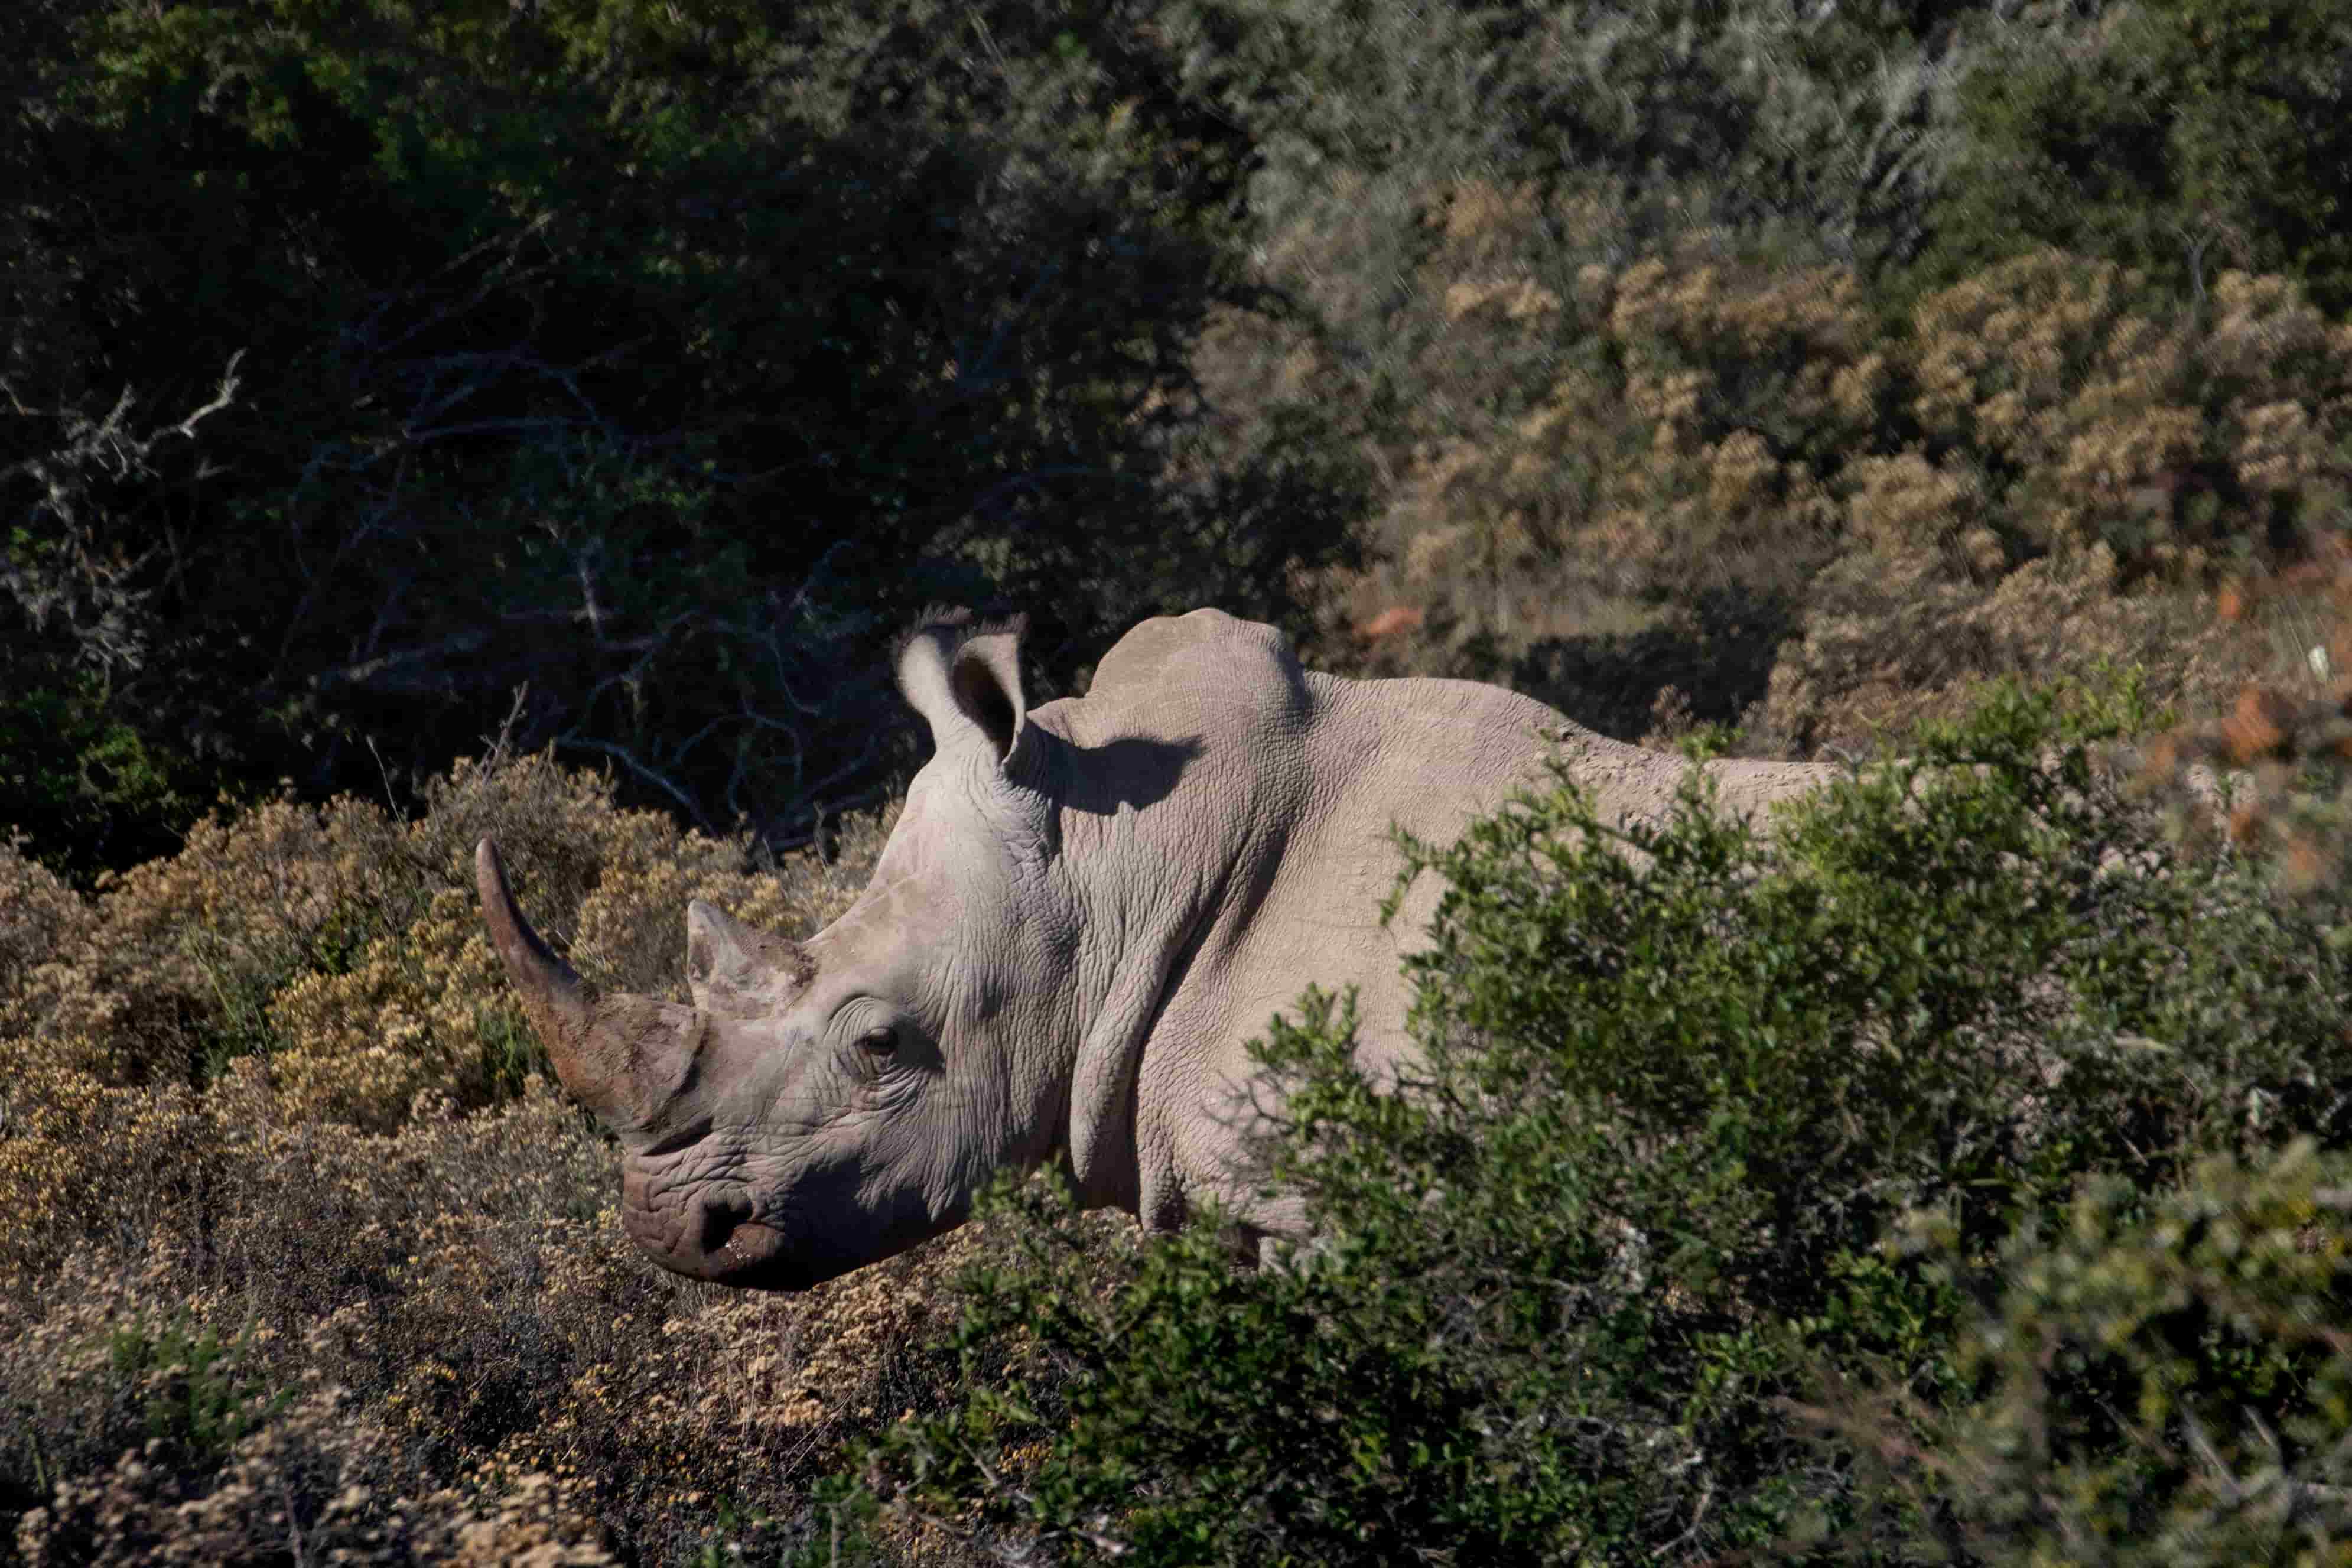 Report: Rhino Poaching on The Rise in South Africa